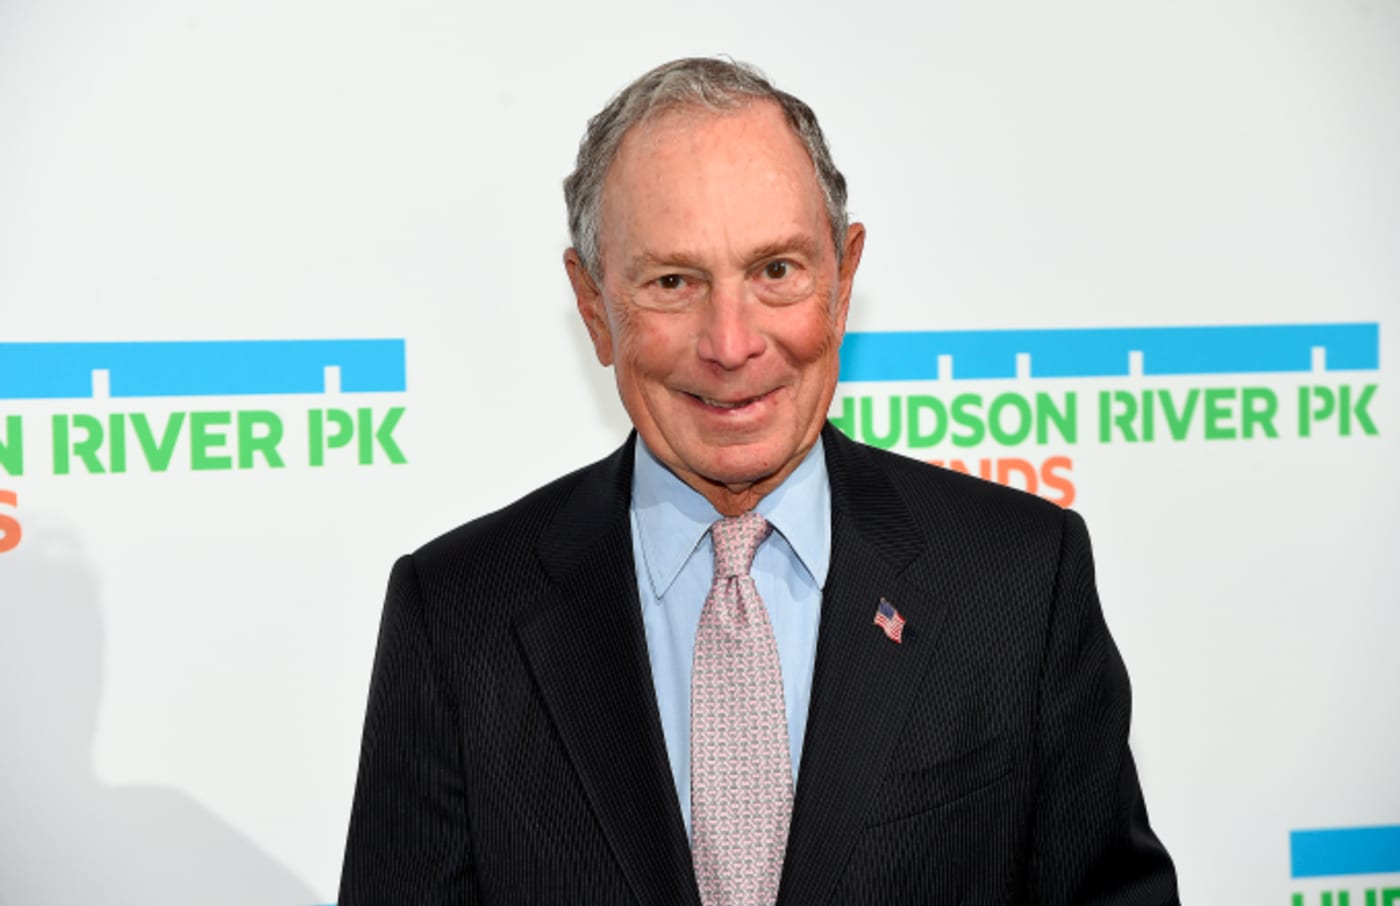 Michael Bloomberg attends the Hudson River Park Annual Gala